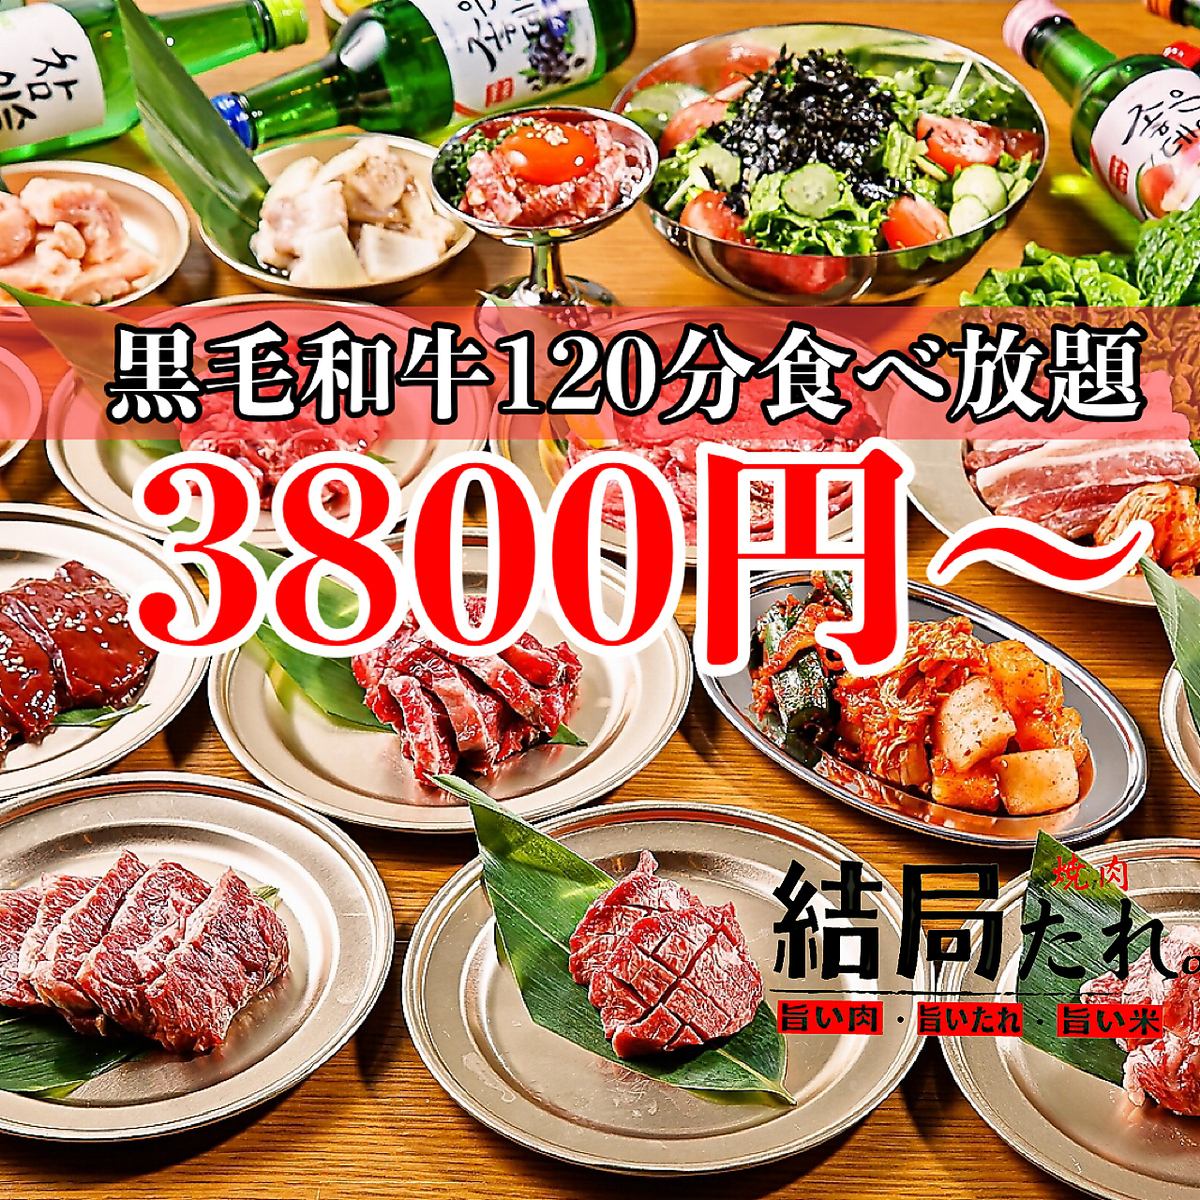 [The secret of the delicious sauce that you'll understand once you try it] Best value for money all-you-can-eat in Umeda ★ Grilled Yukhoe is also available◎